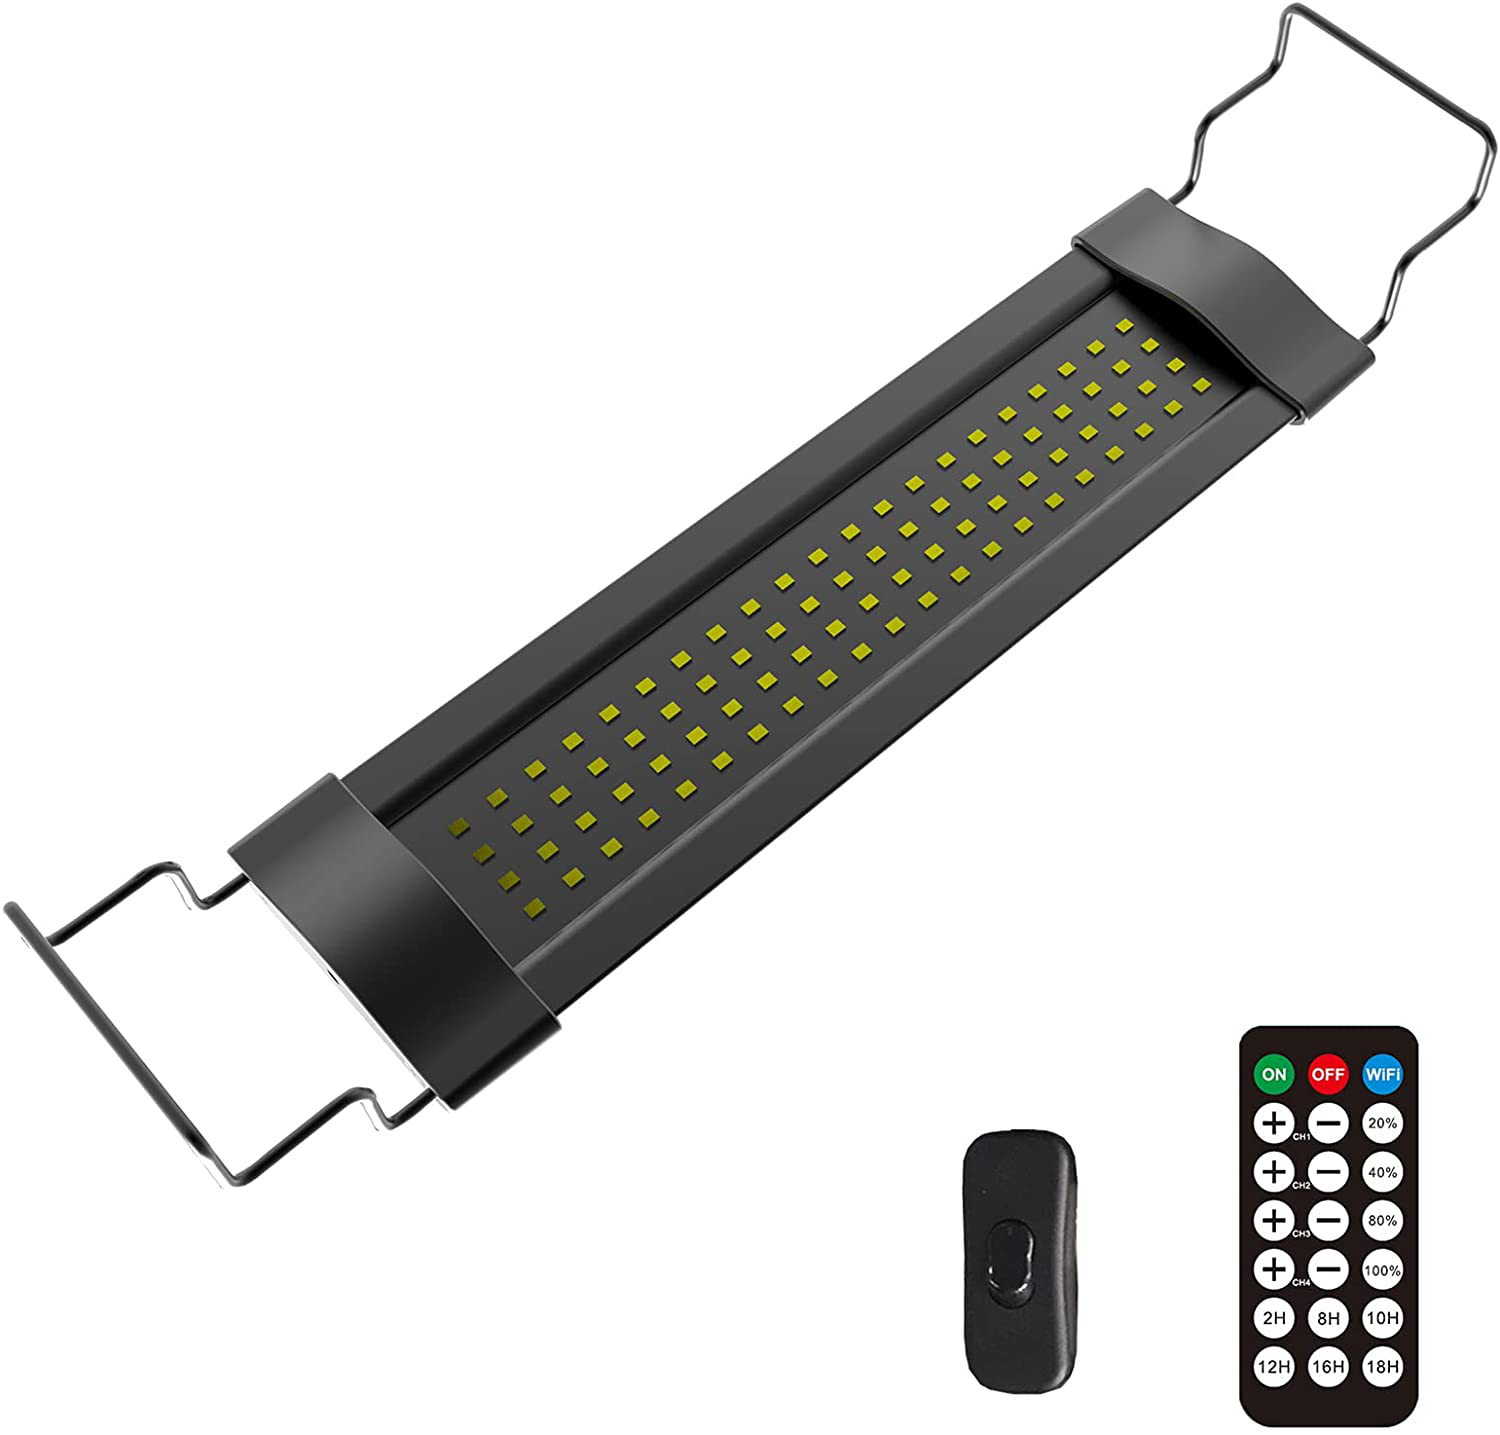 Lominie Aquarium LED Light, High Brightness 15W Fish Tank Light Adjustable with RF Remote Controller, Extendable Brackets Easy to Install for Saltwater Coral Fish Tank (G15 Saltwater)